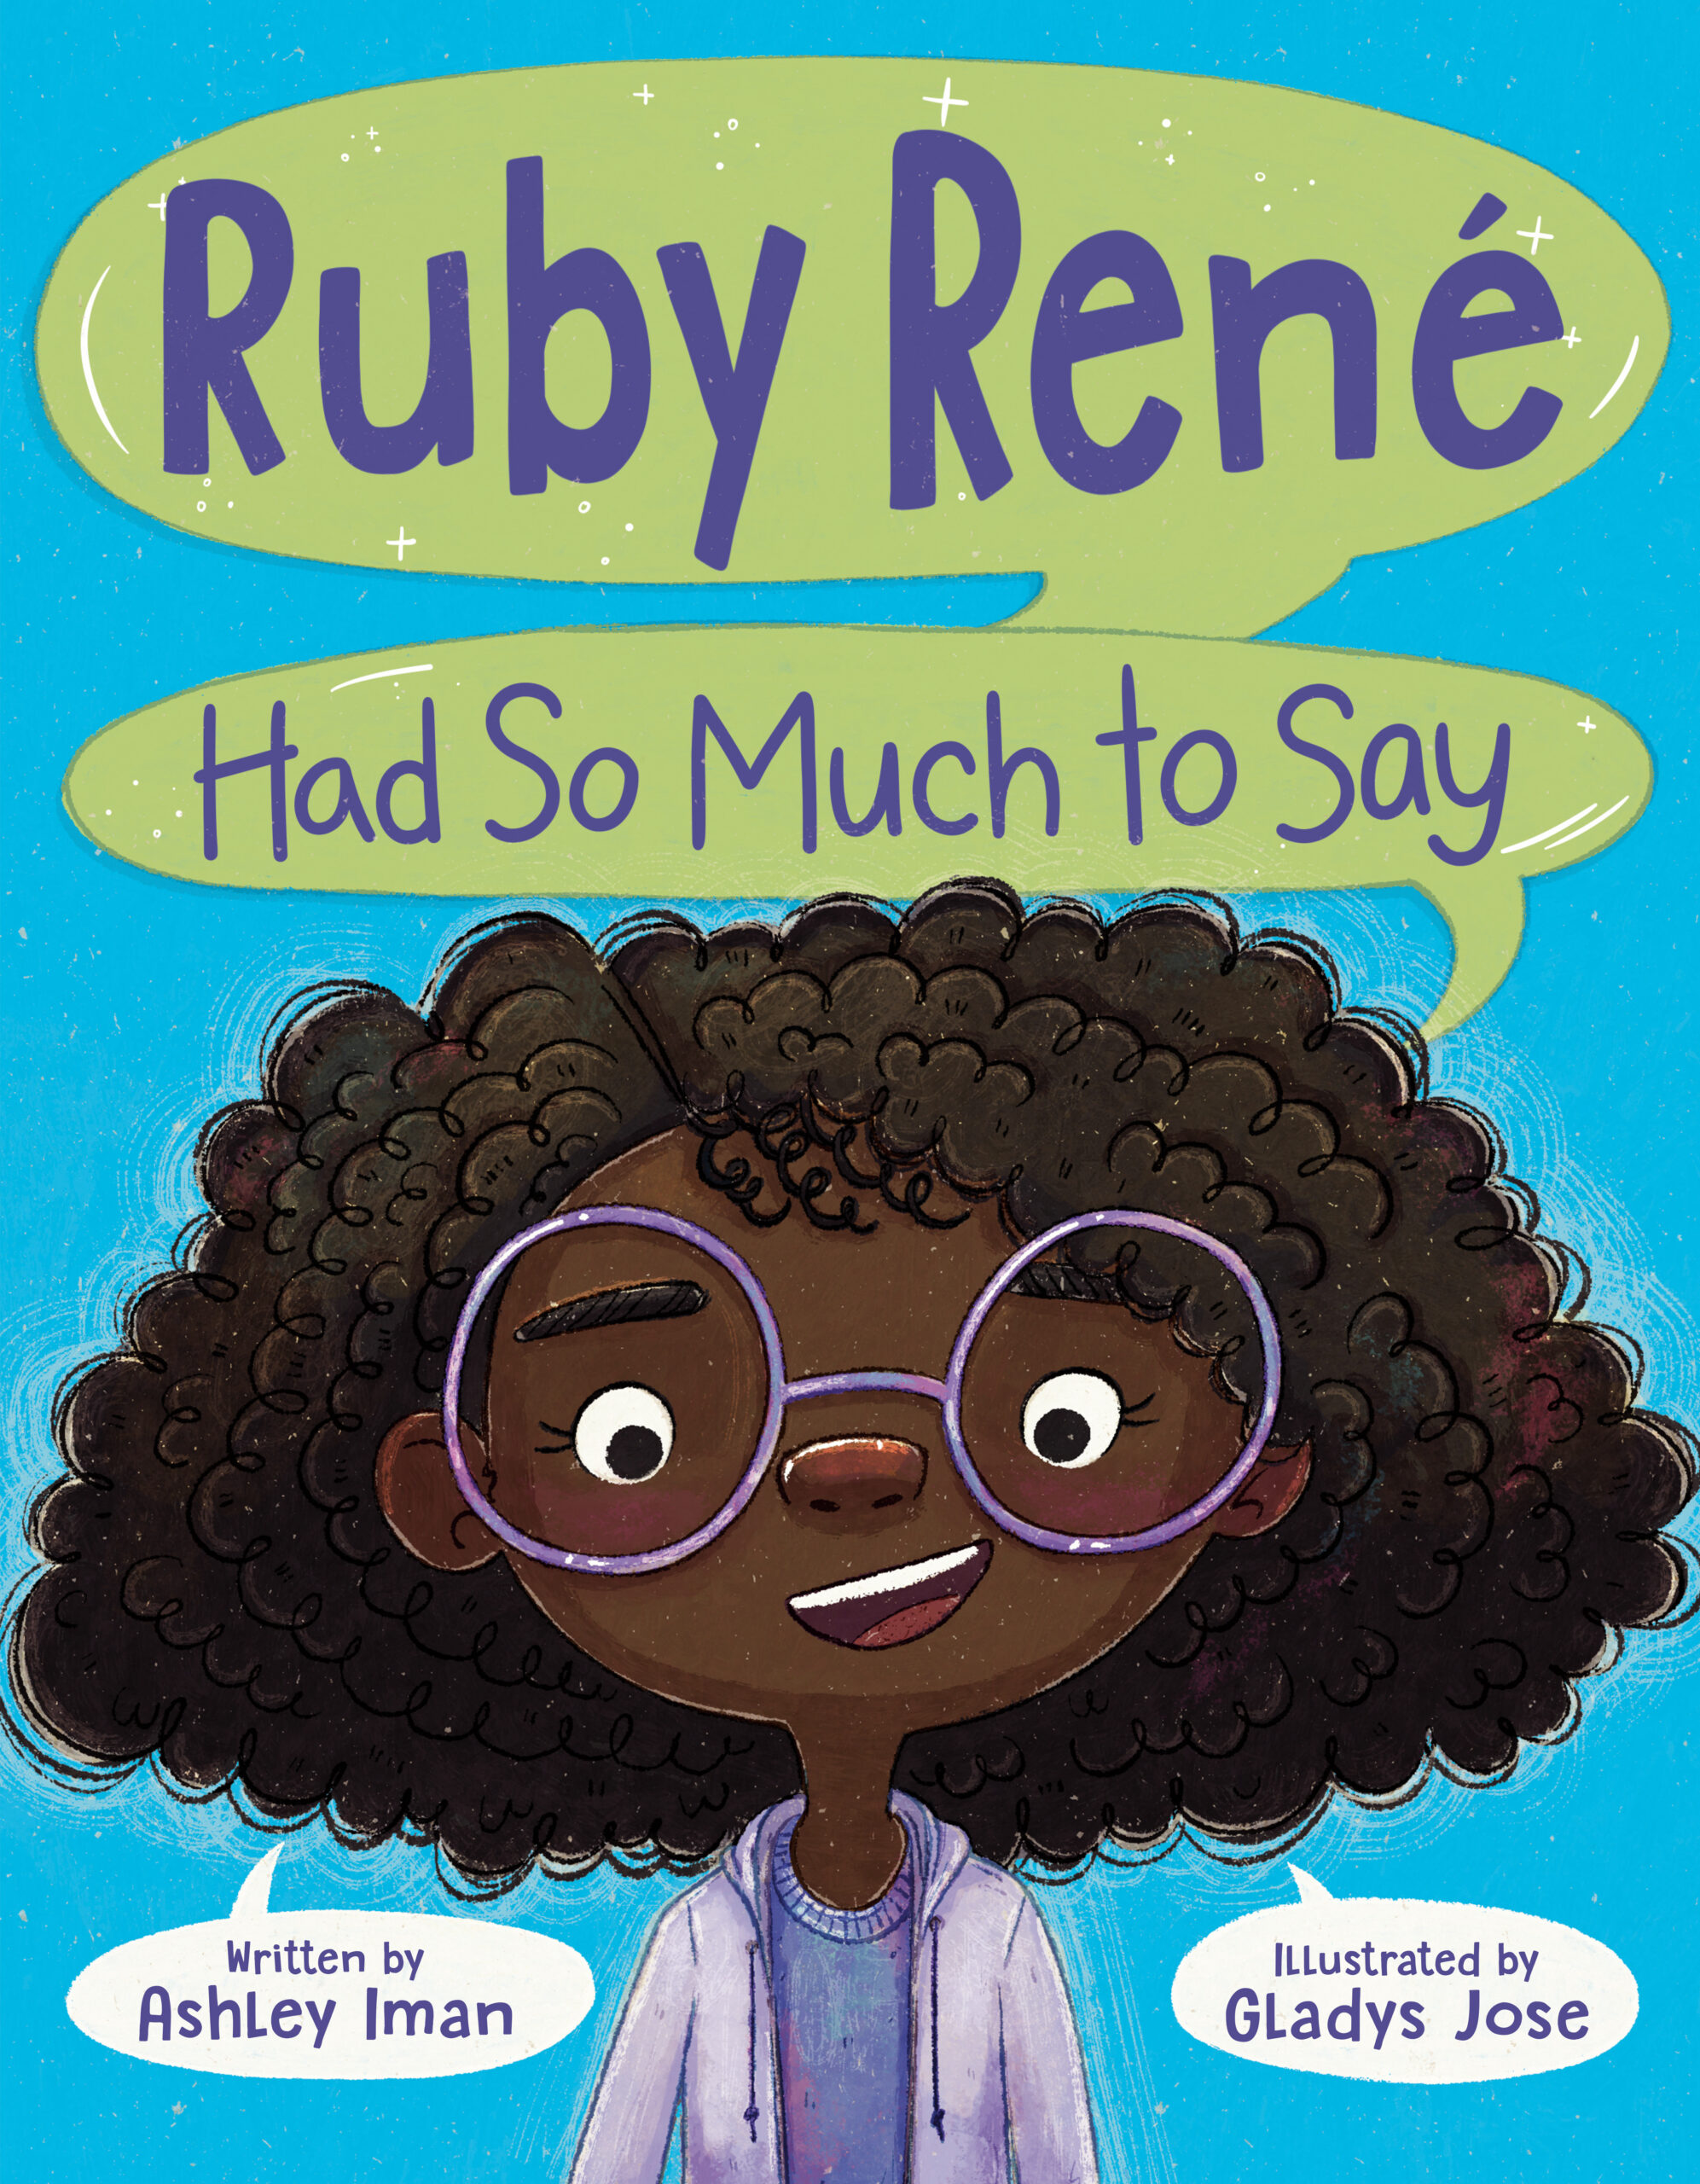 Ruby rene scaled on successful black parenting magazine